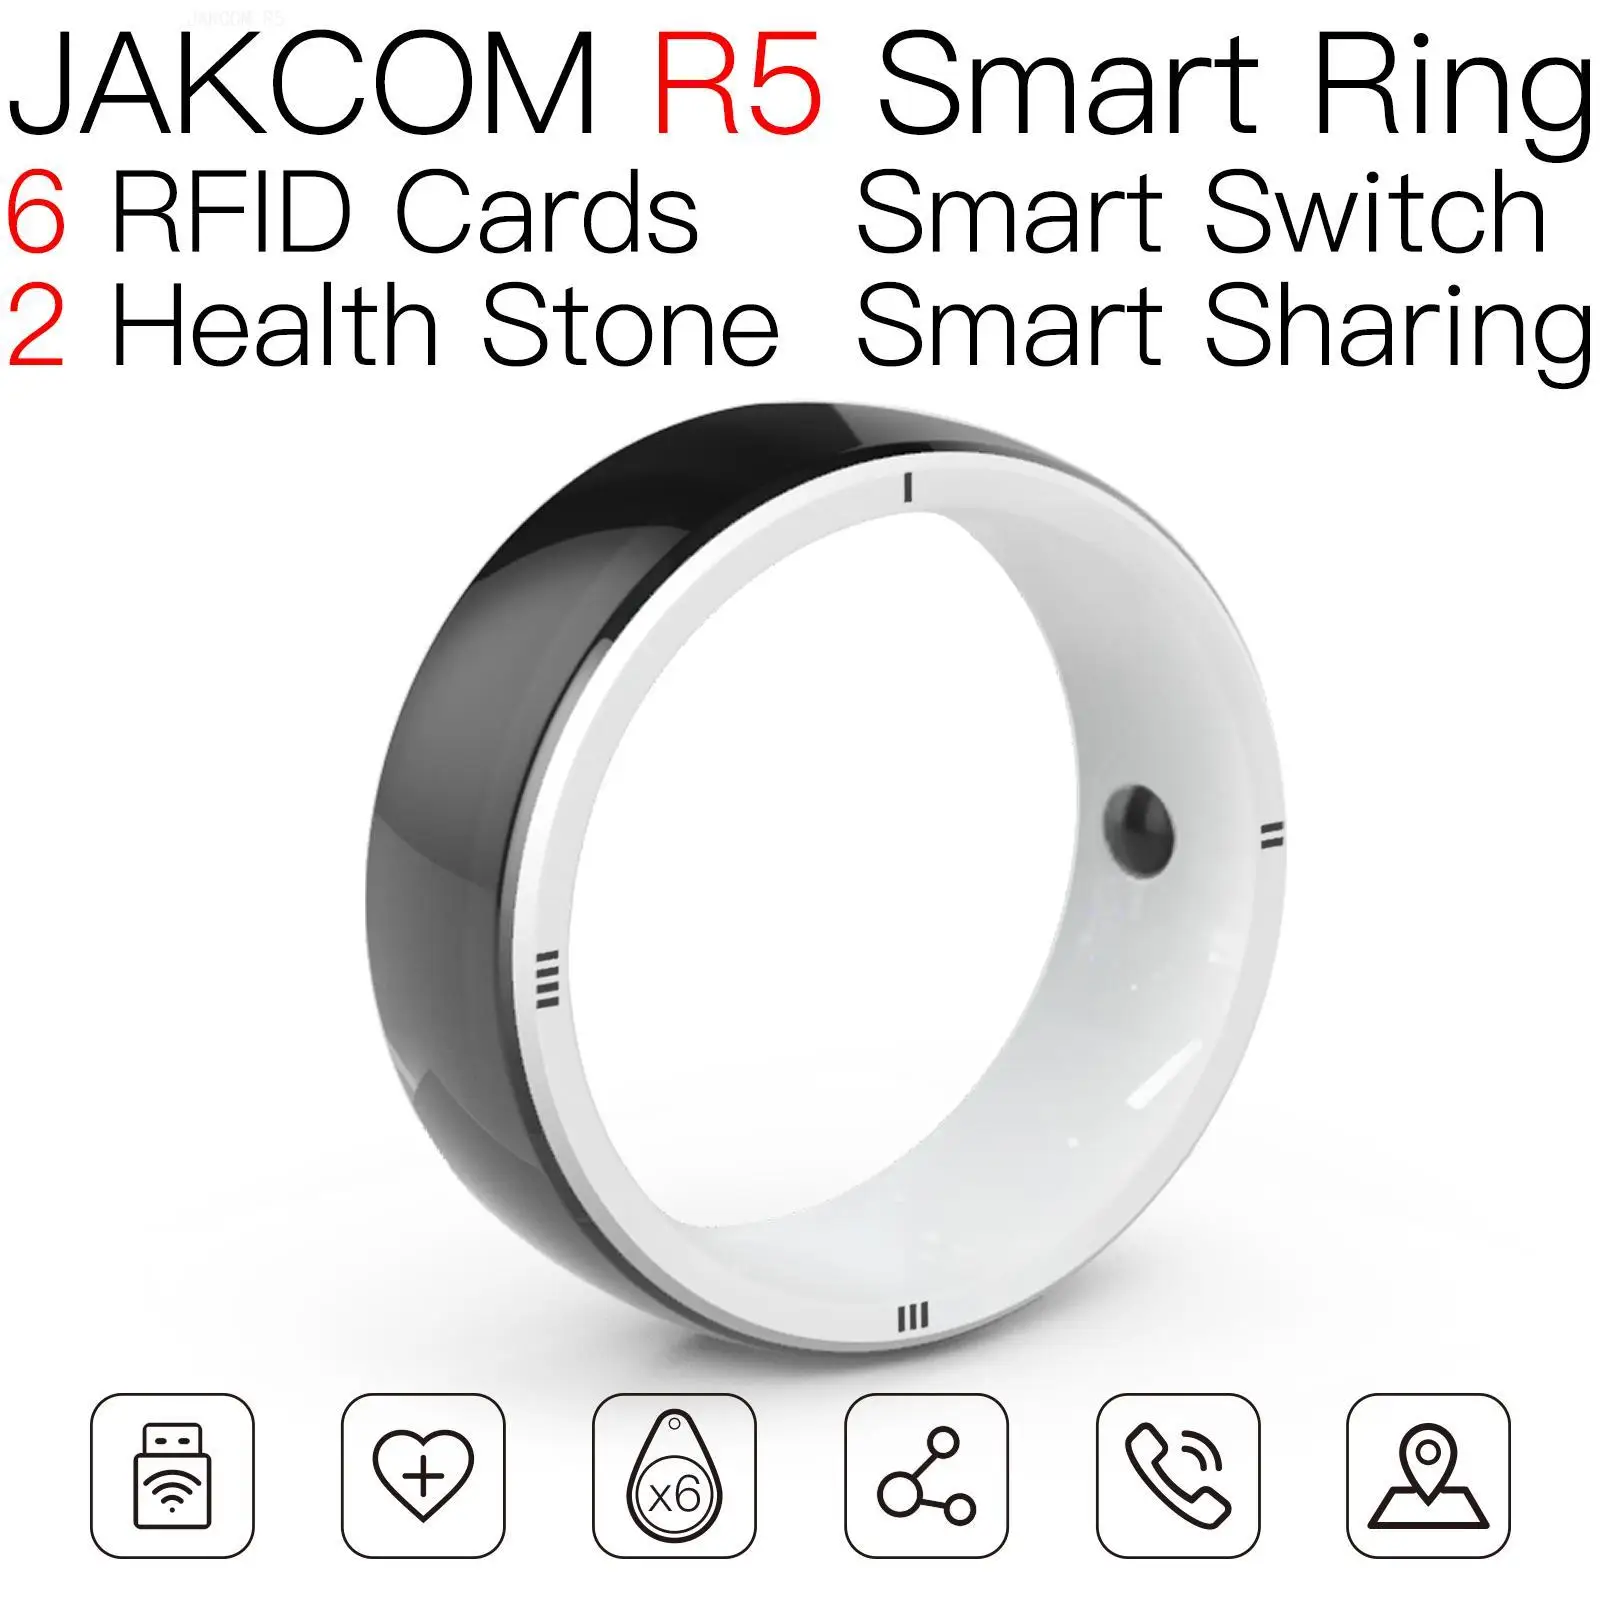 

JAKCOM R5 Smart Ring Newer than ws3 smart bracelete thermometer 2 wrists watch for men 5 home products band touch